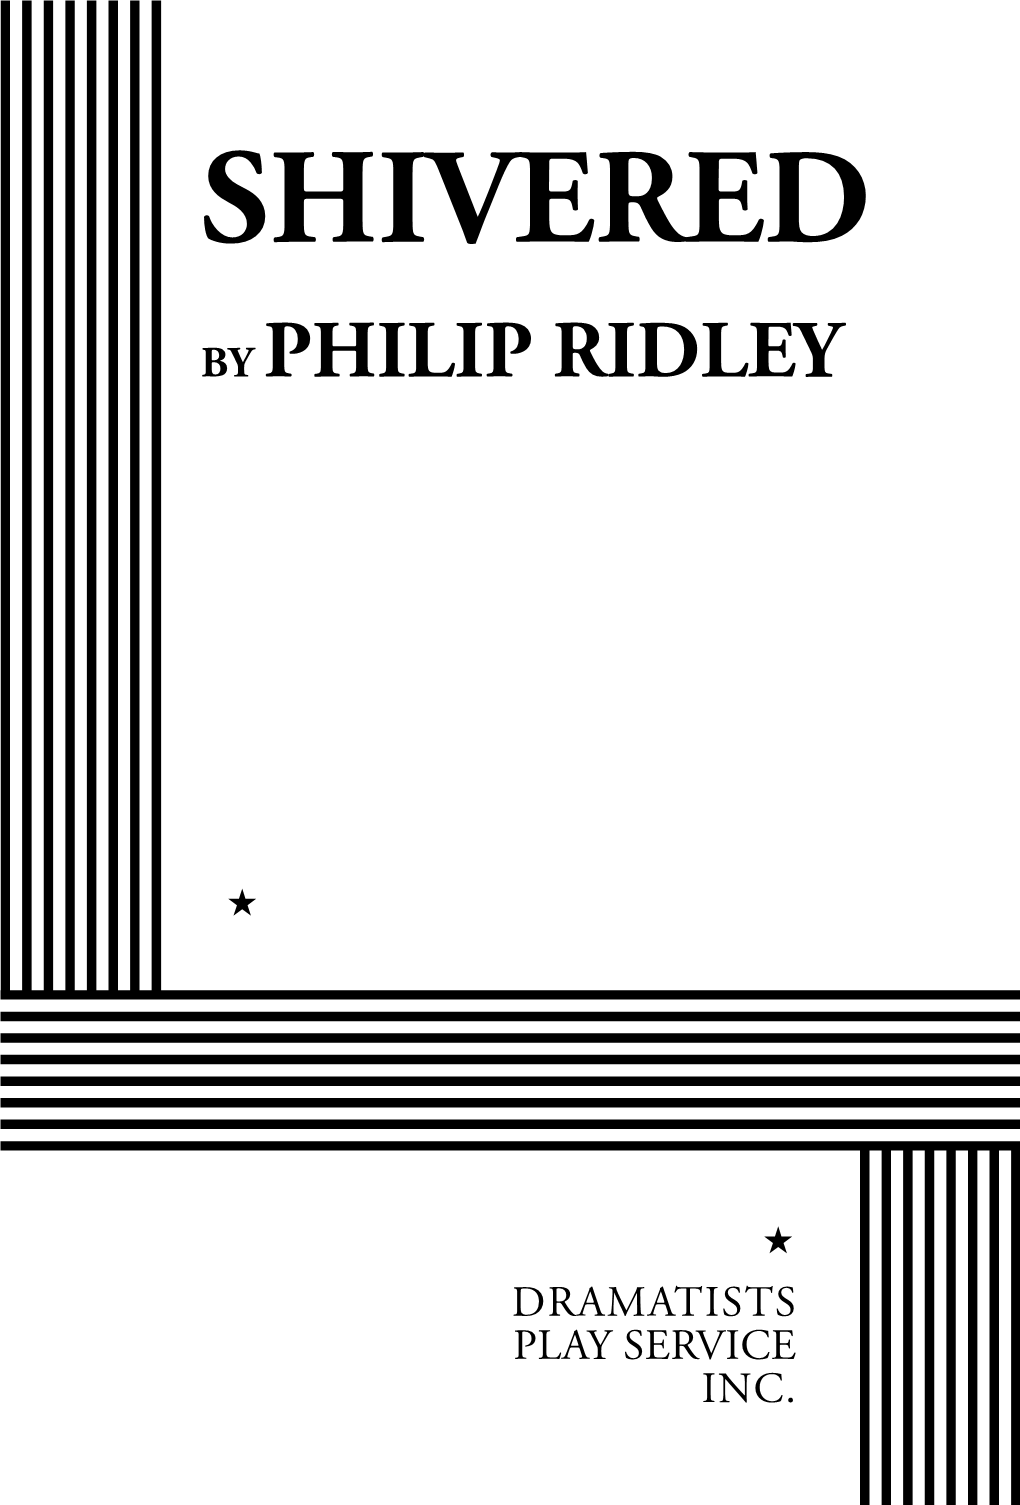 SHIVERED by Philip Ridley